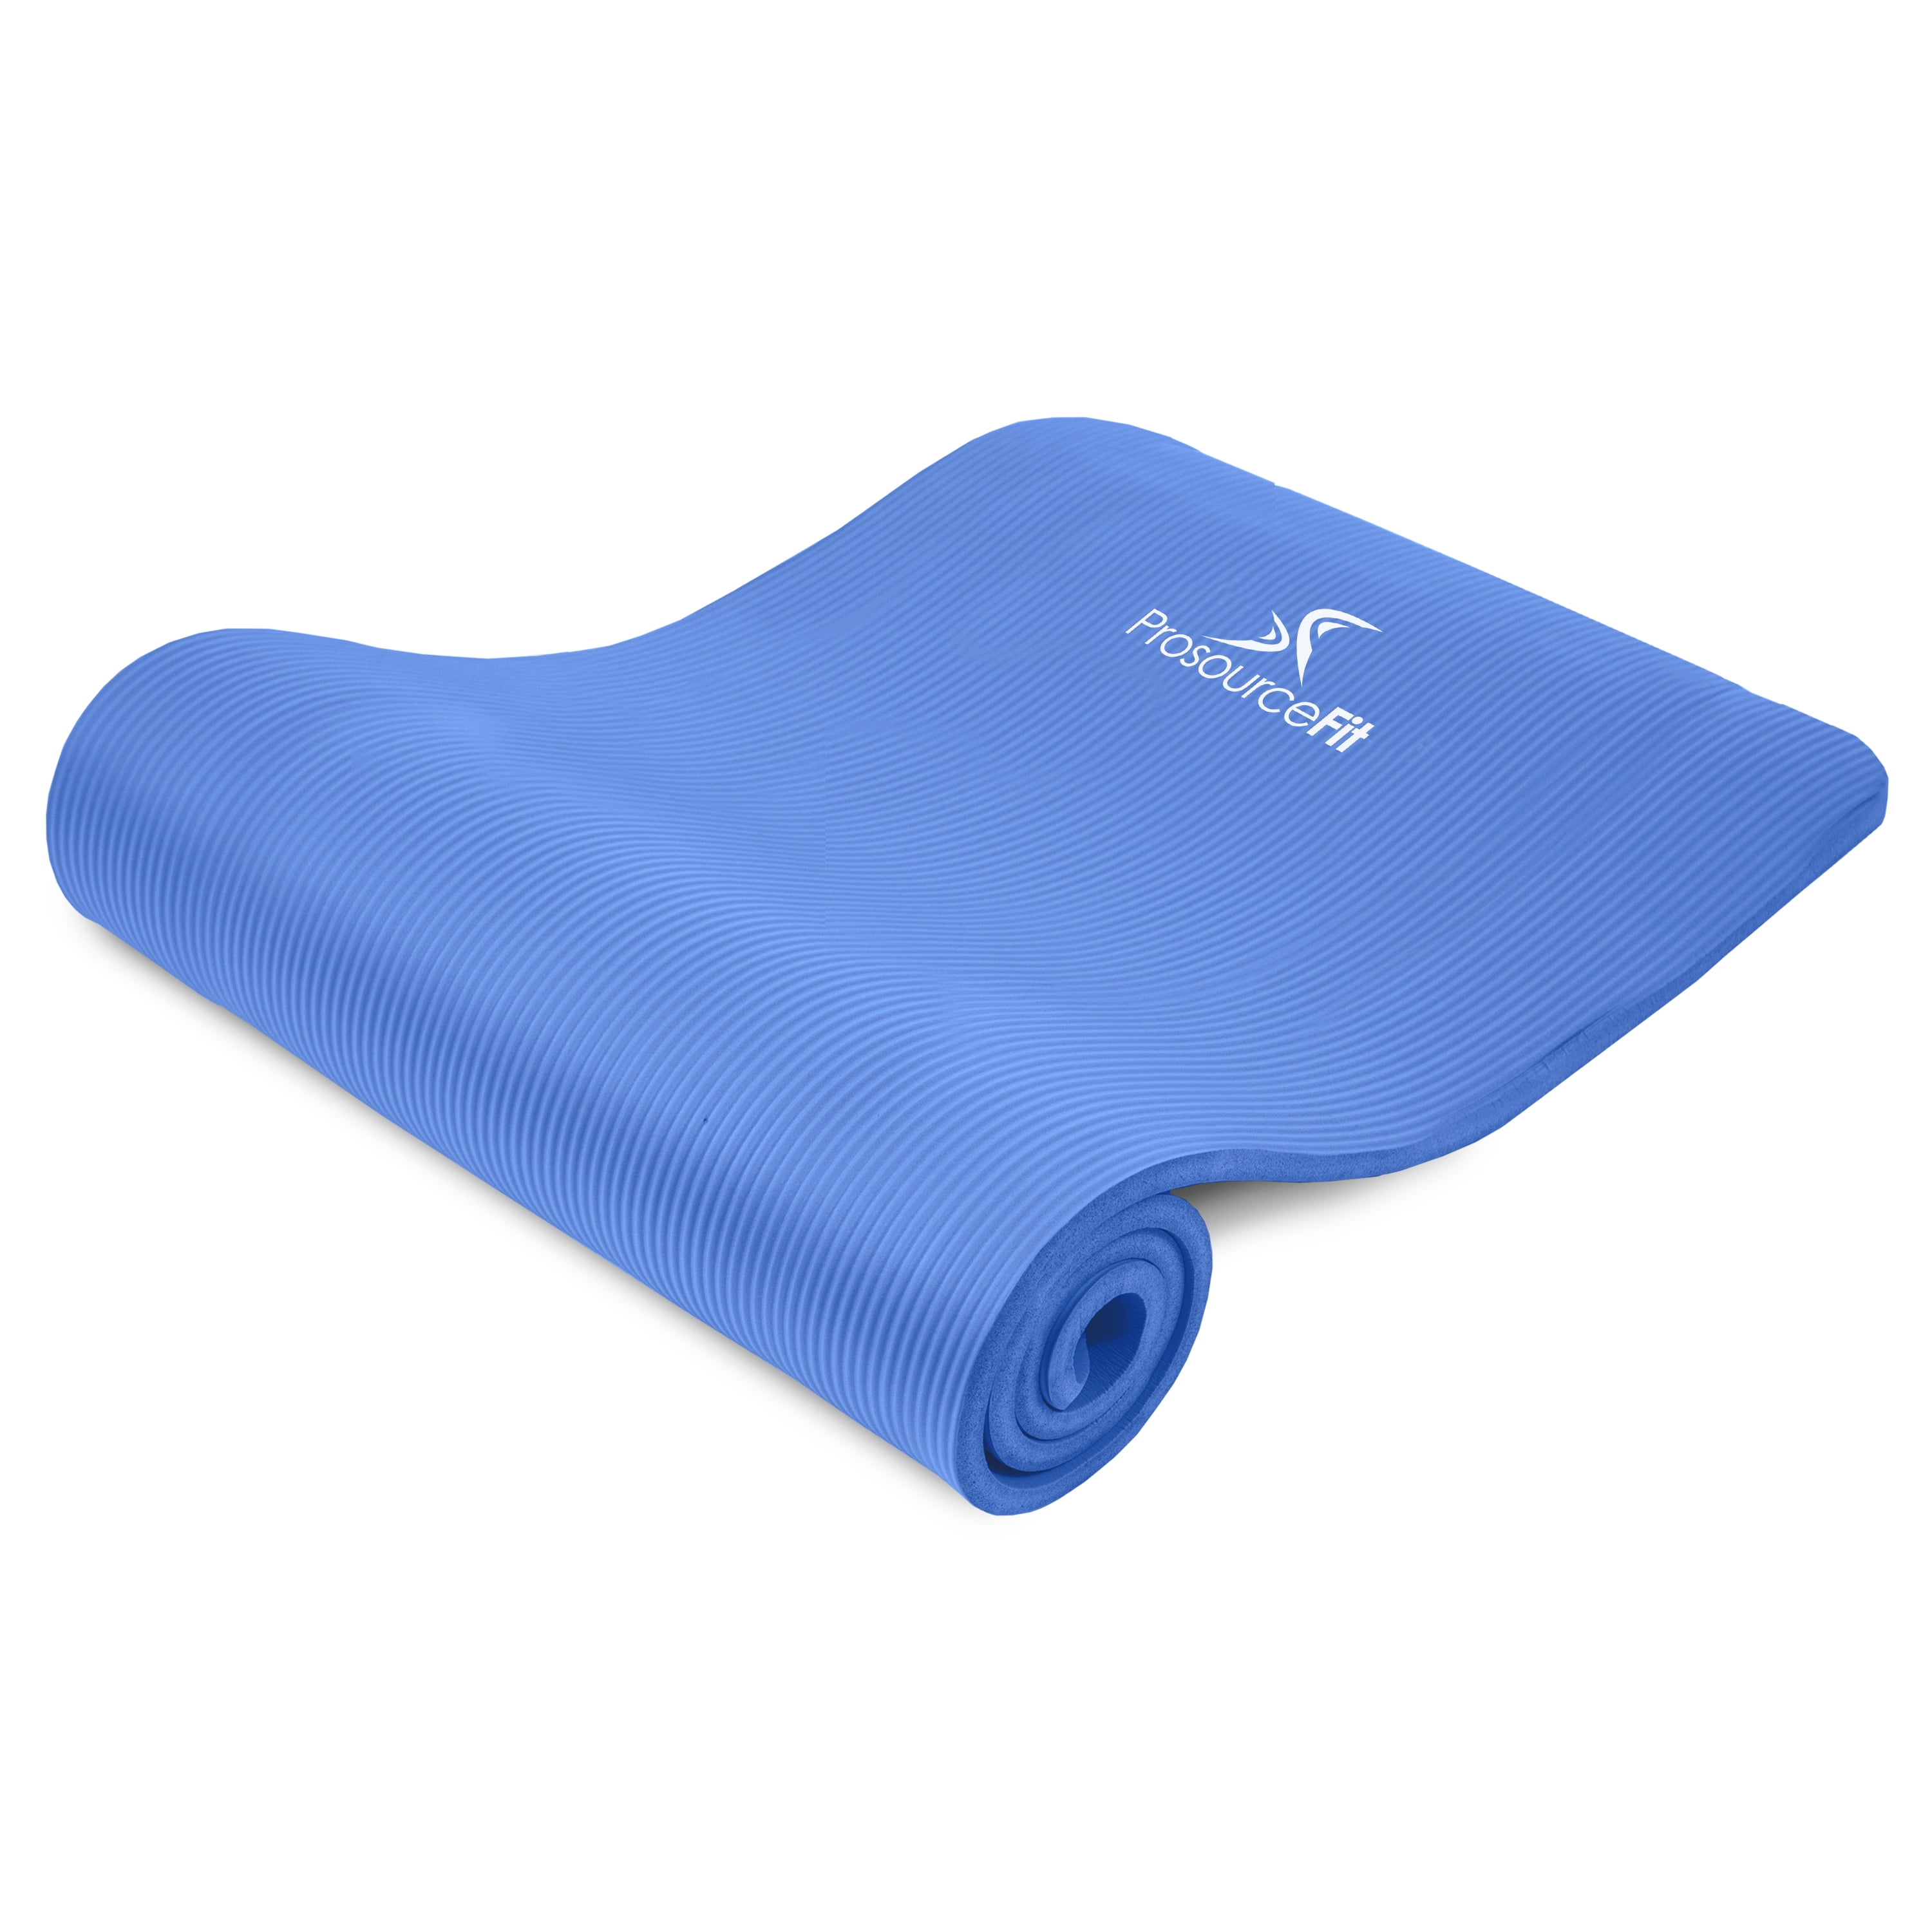 2 inch thick exercise mat